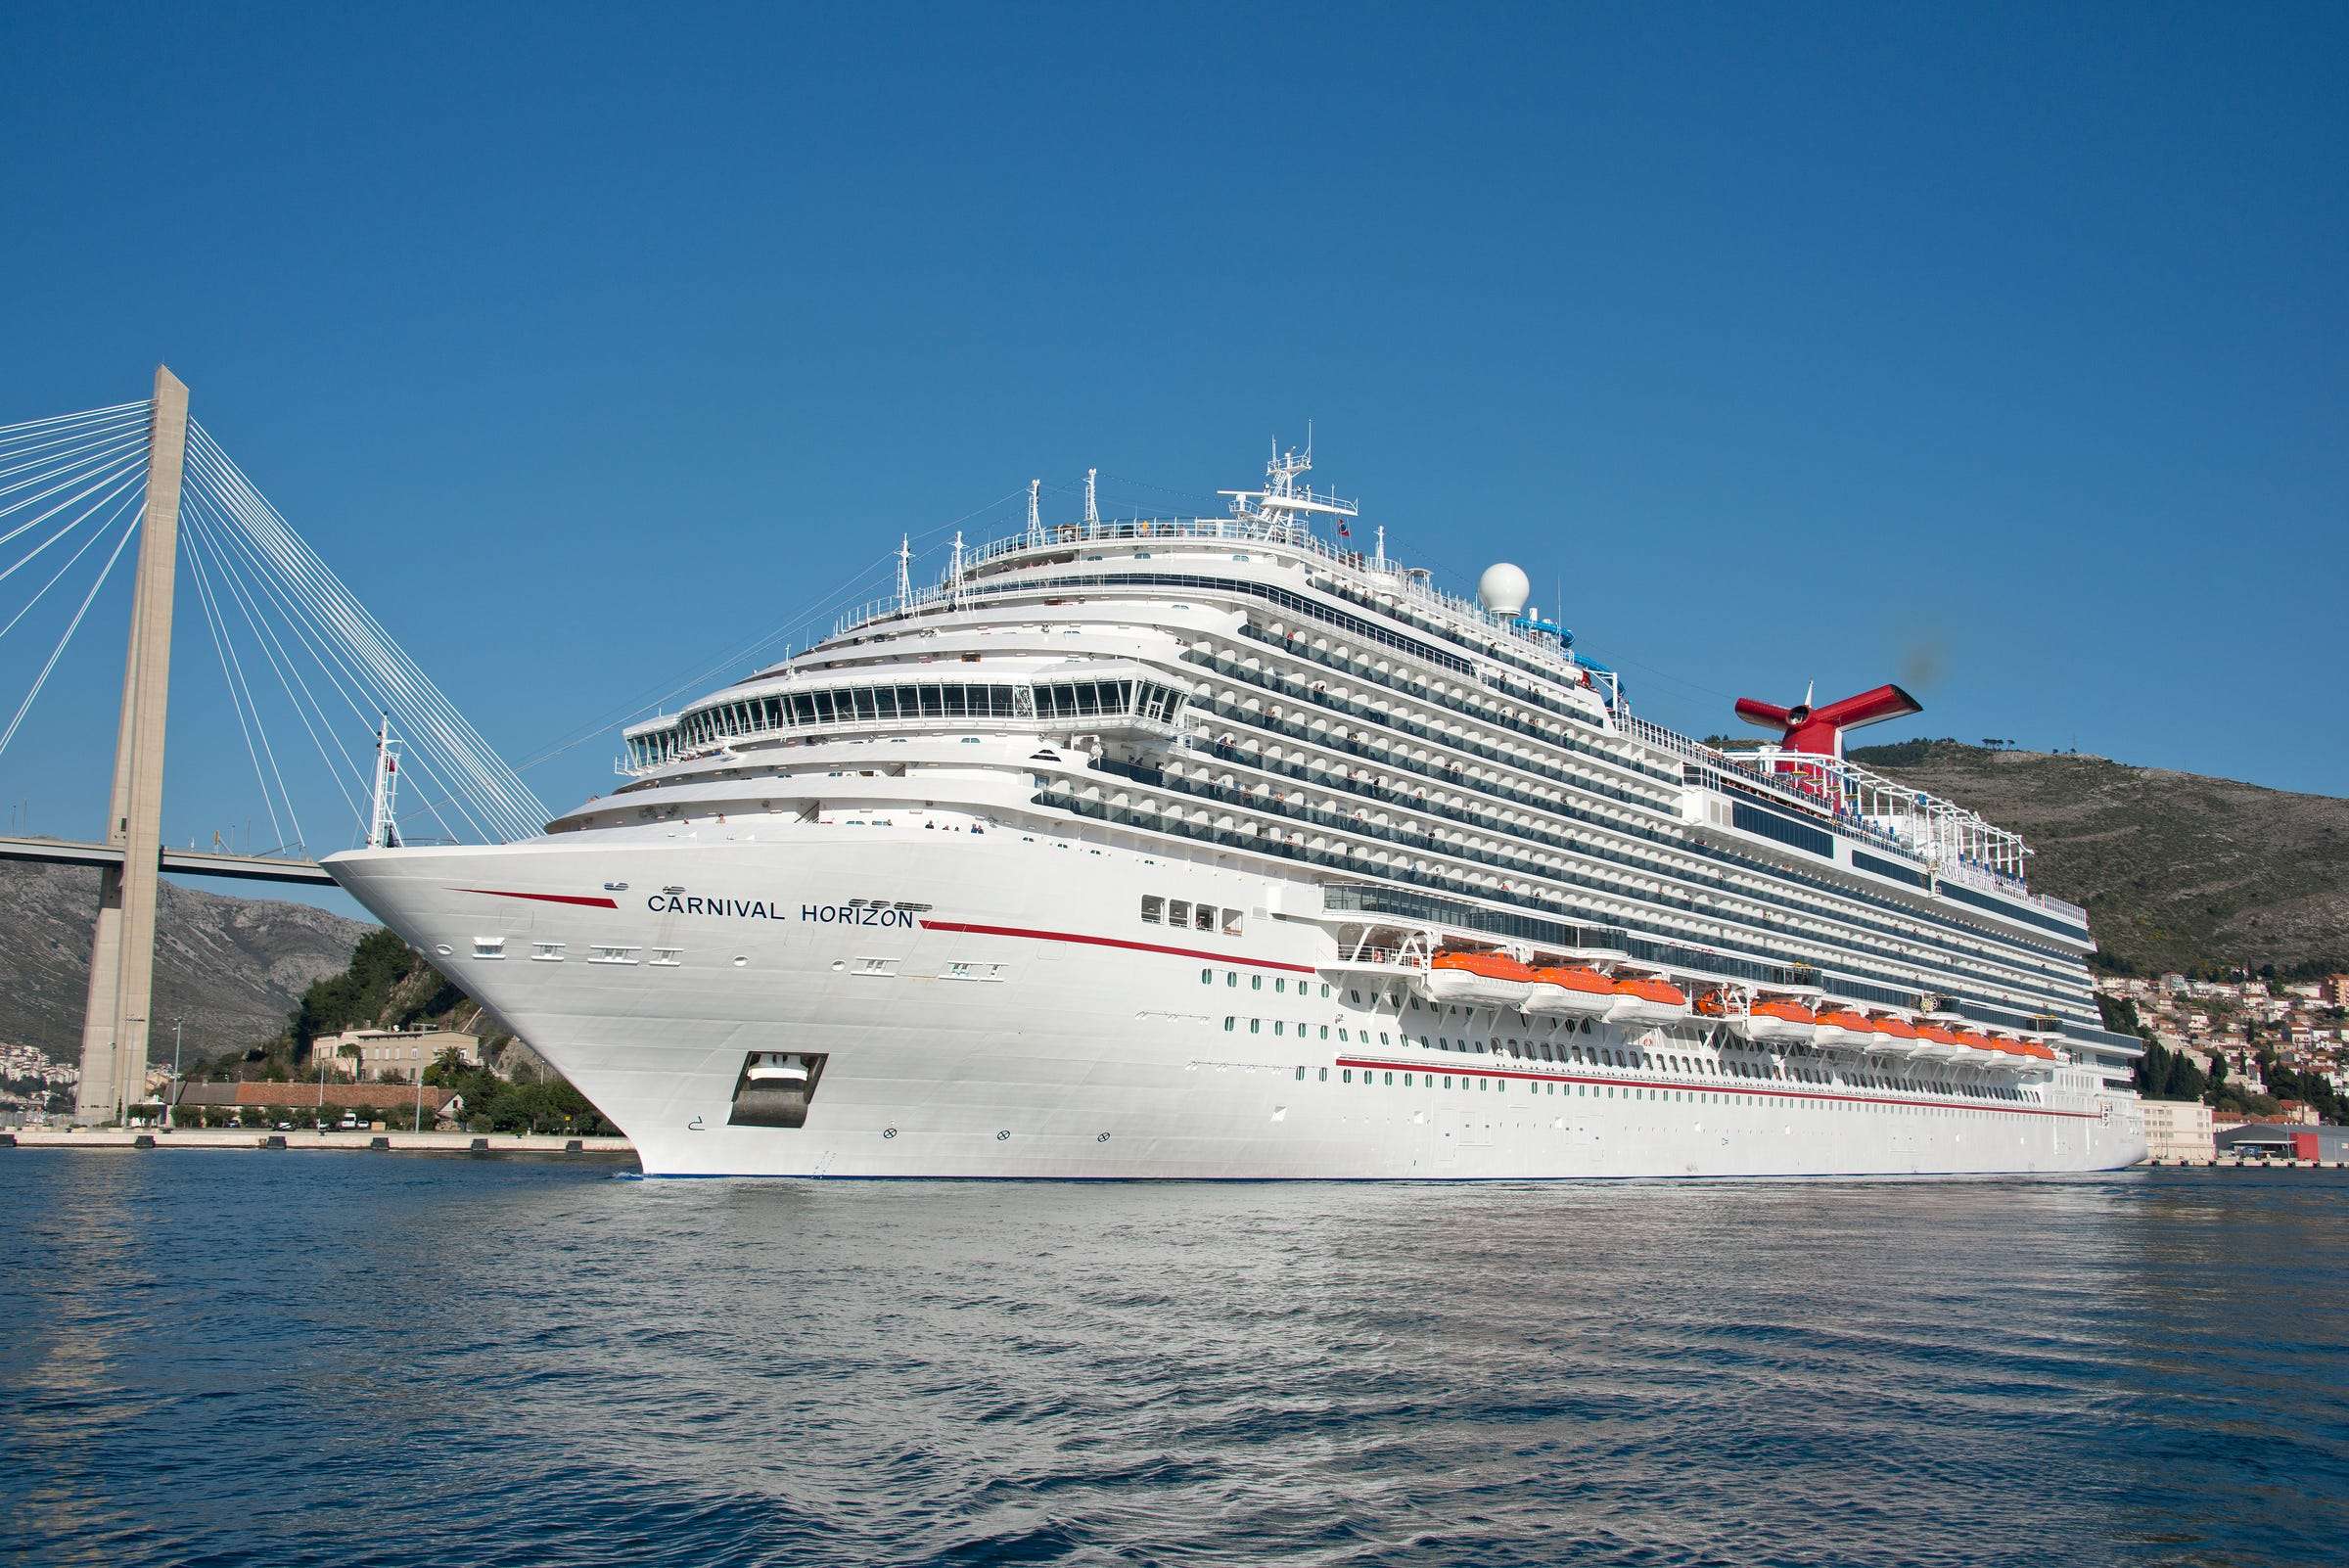 Carnival Horizon cruise ship details and pictures ...